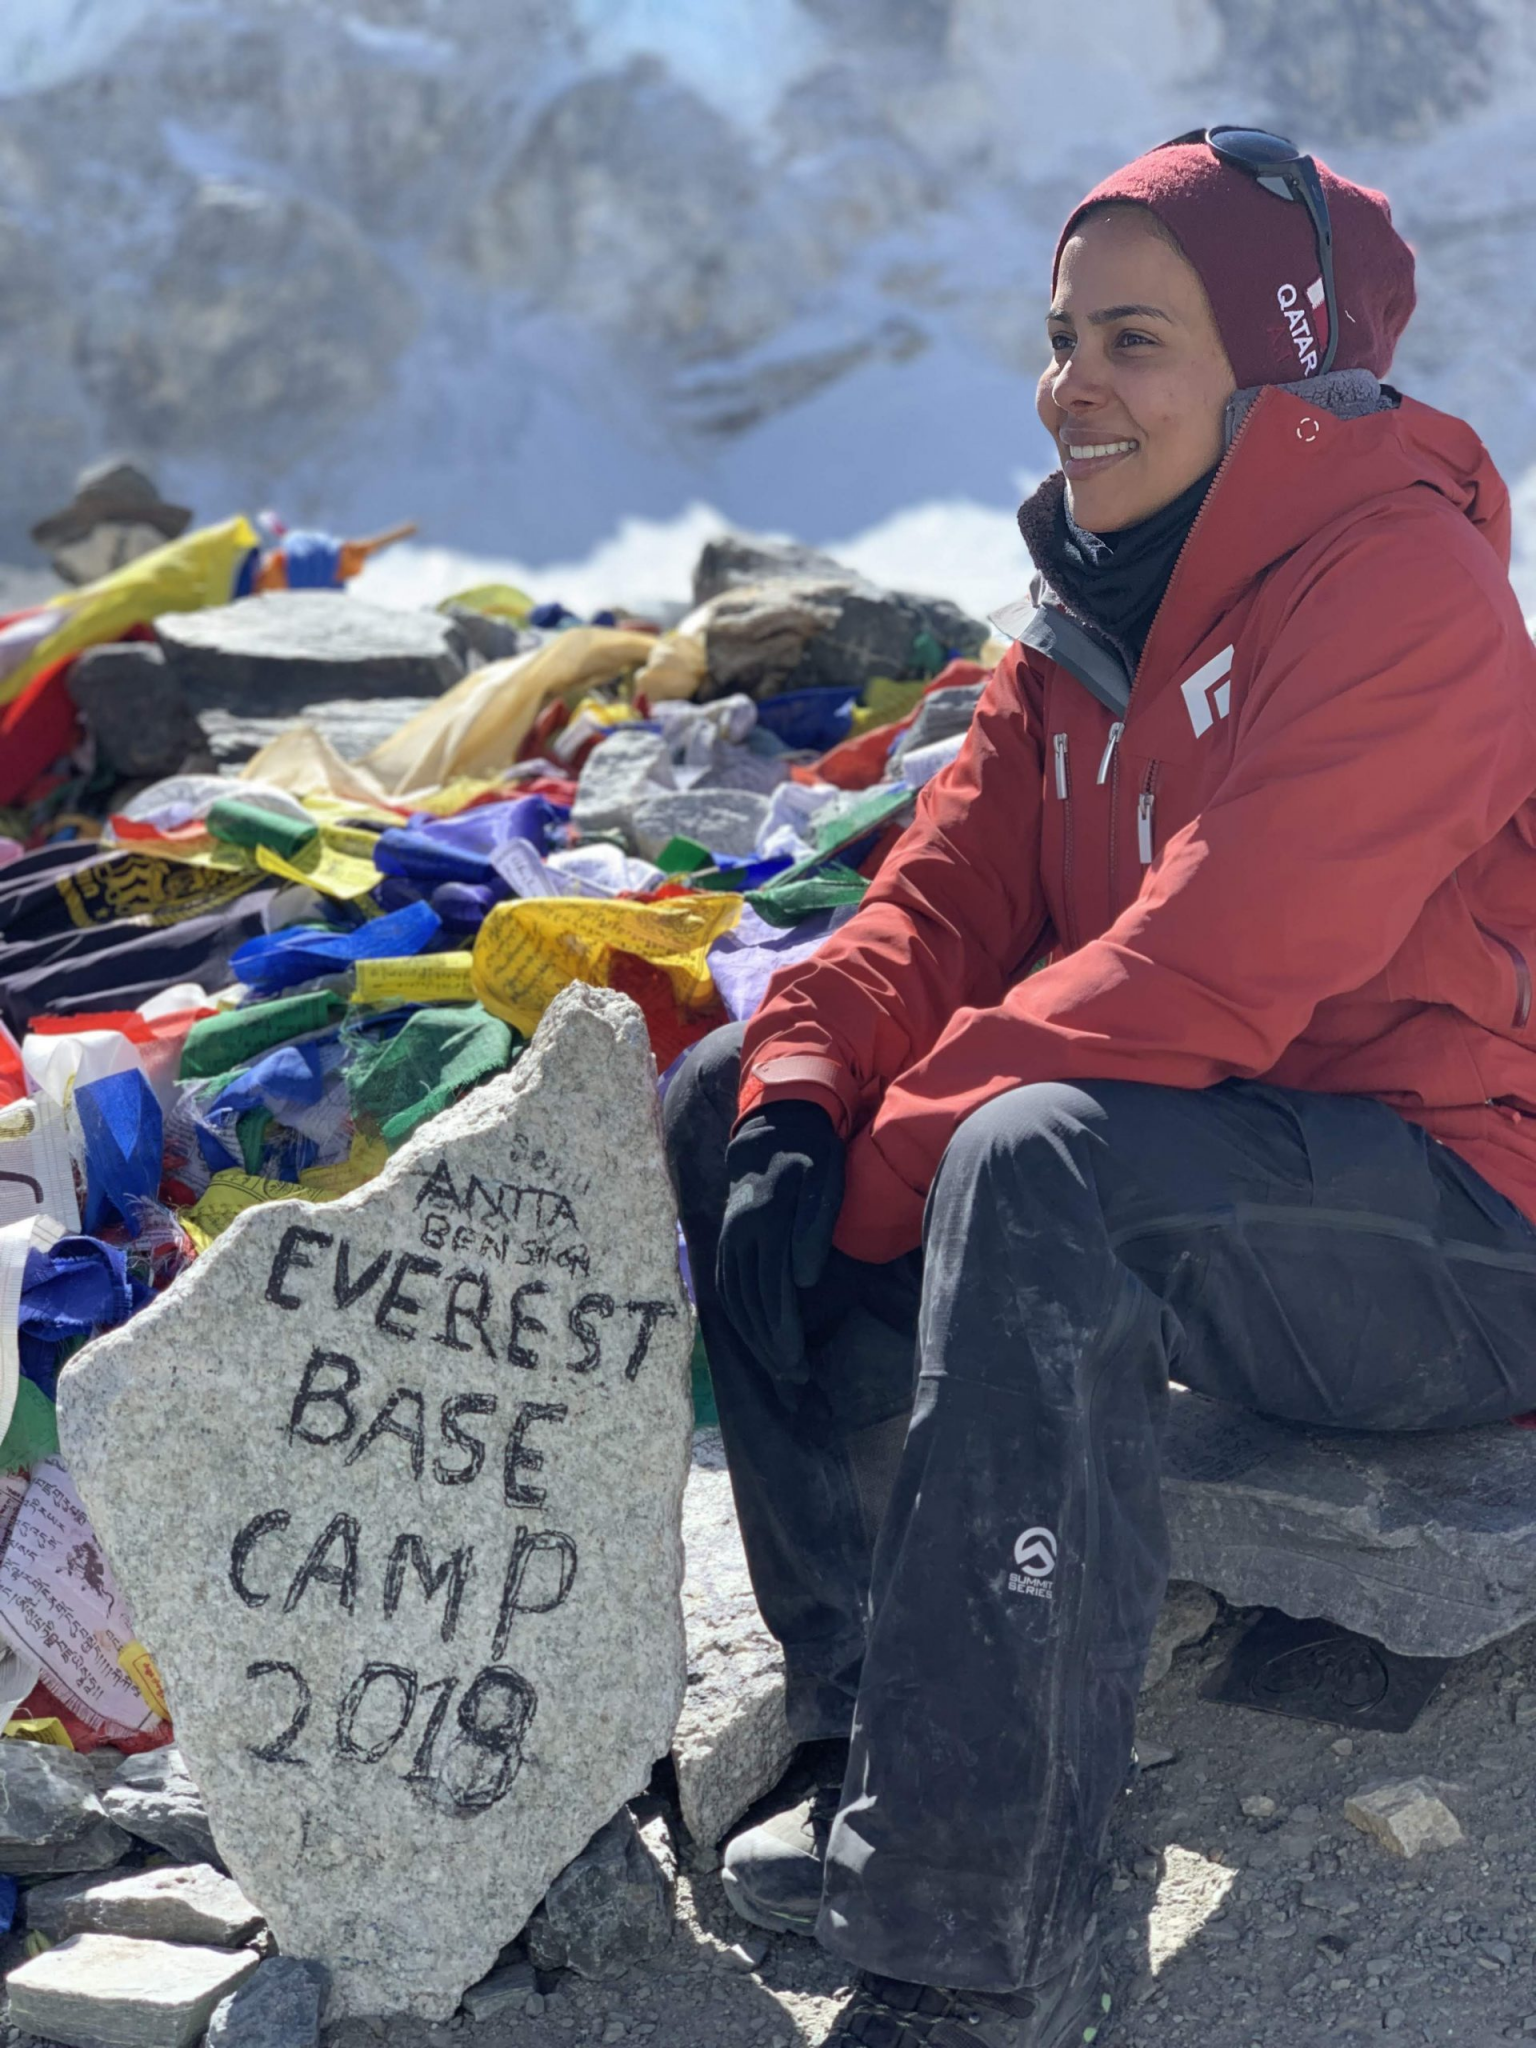 ANOC Commission member targets summit of Mount Everest